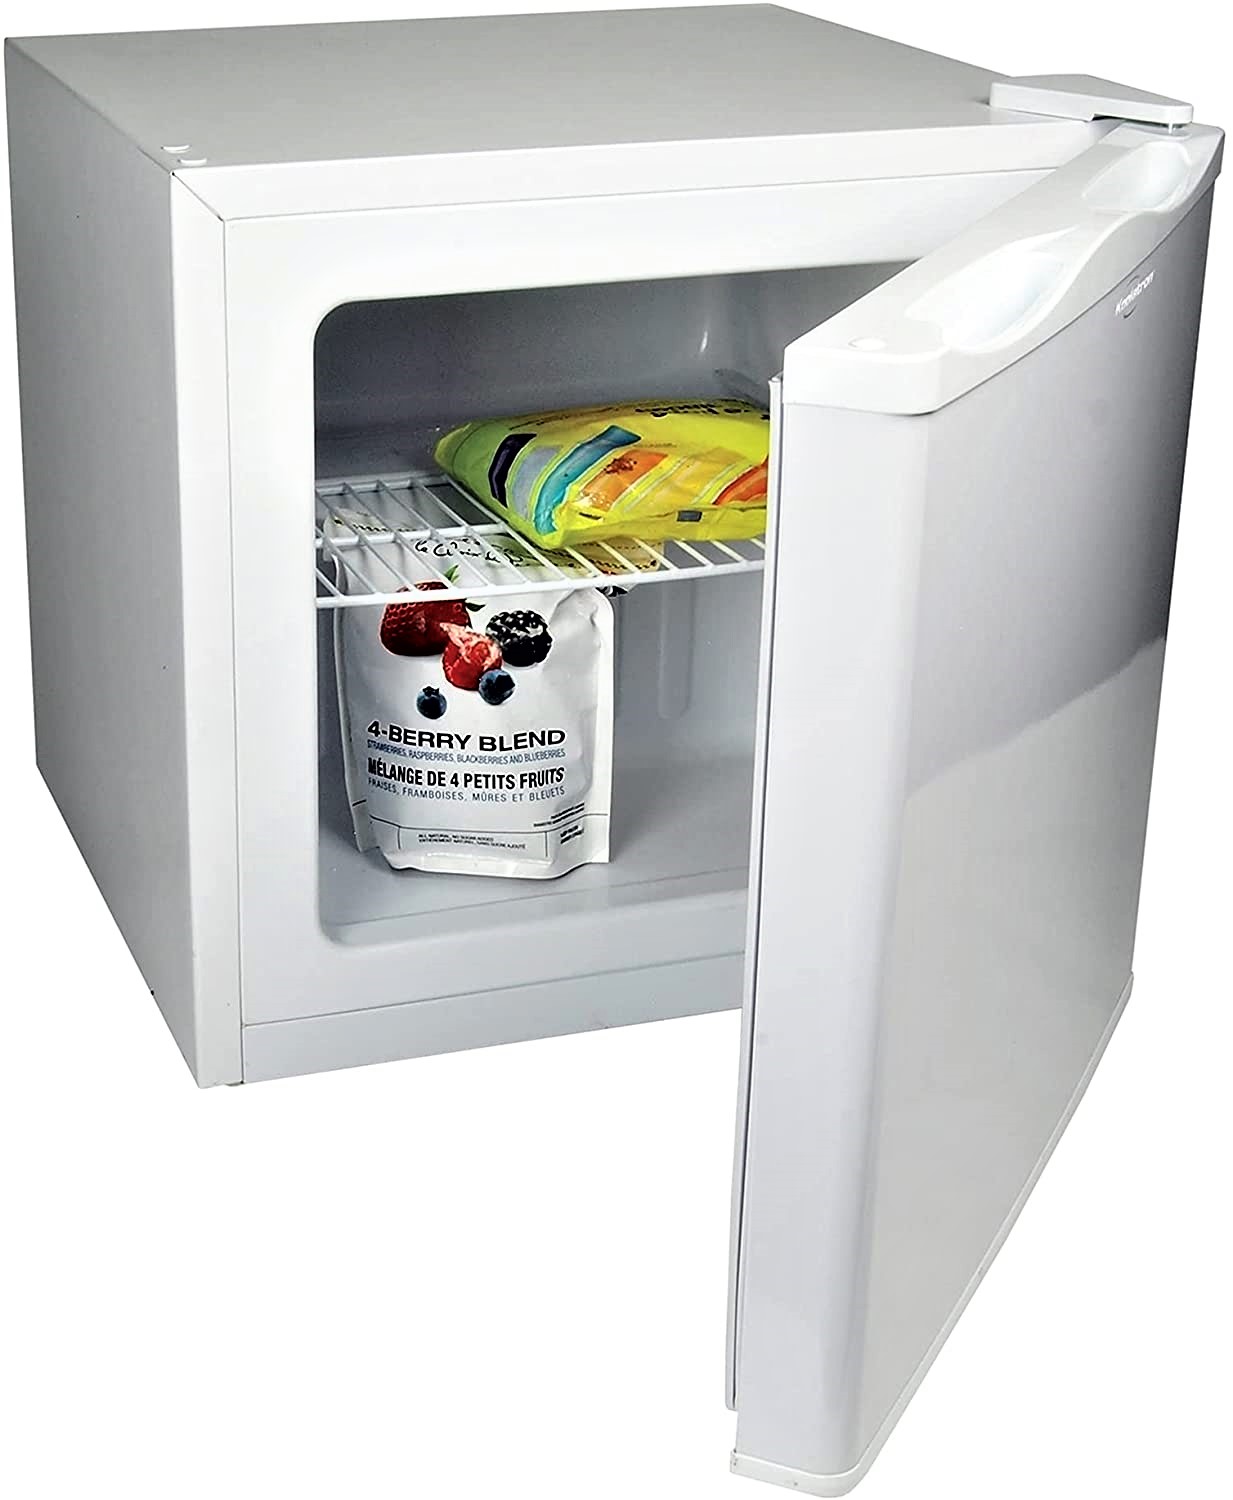 610DlkF5y S. AC SL1500 BEST TABLE TOP - COUNTERTOP FREEZERS 2021 REVIEW SMALL -1.1 - 2.5 MINI UPRIGHT FREEZER